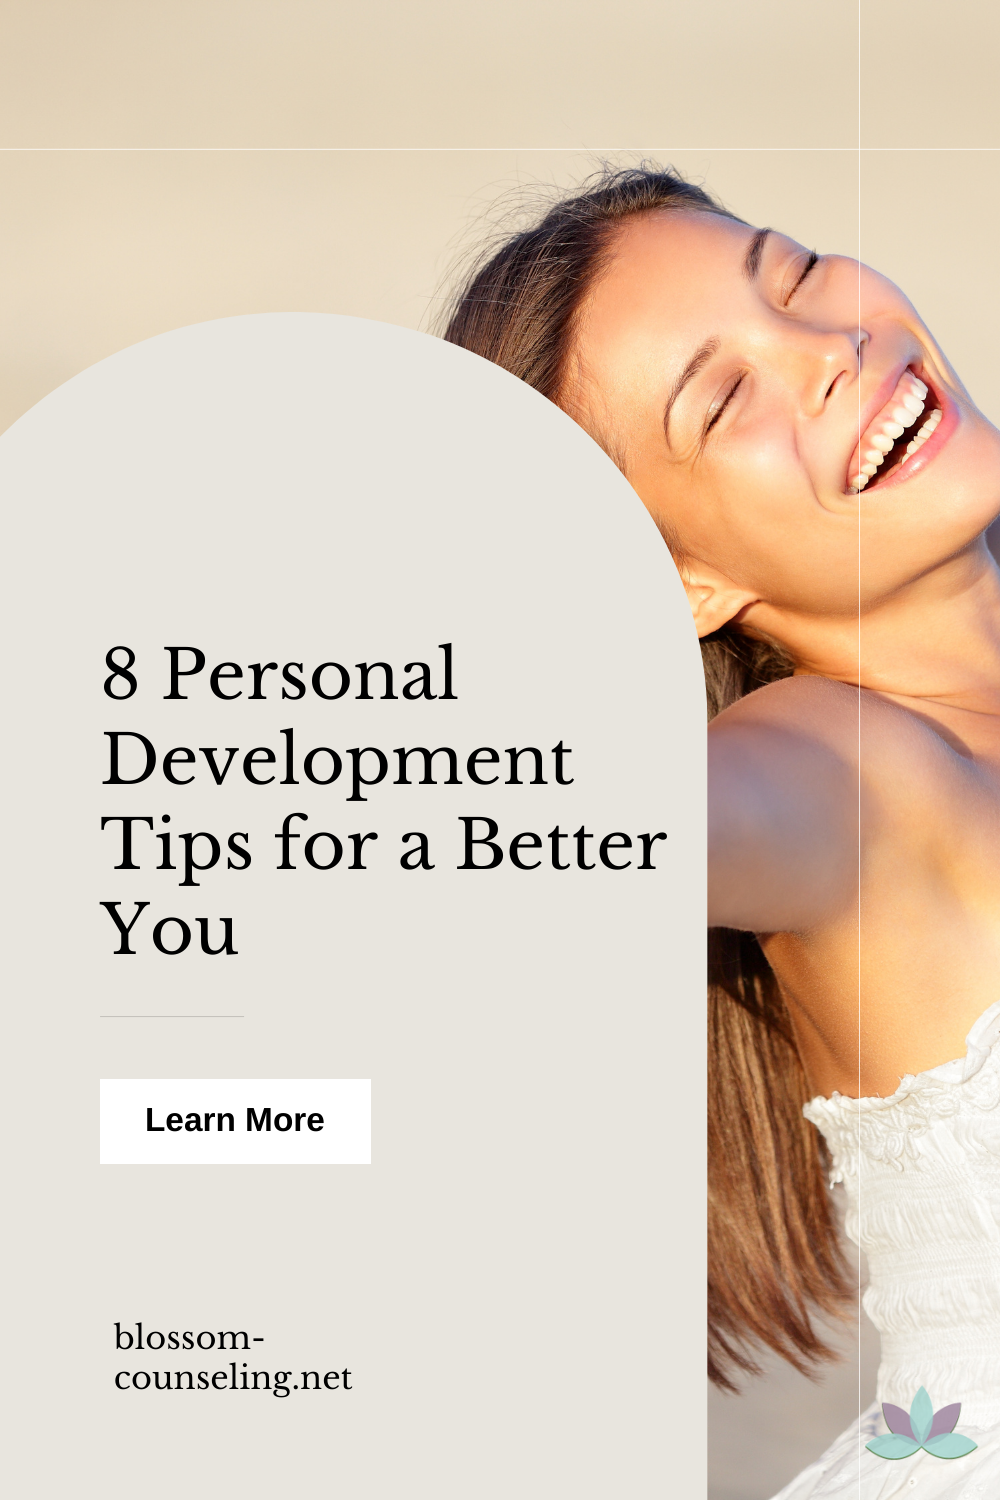 8 Personal Development Tips for a Better You